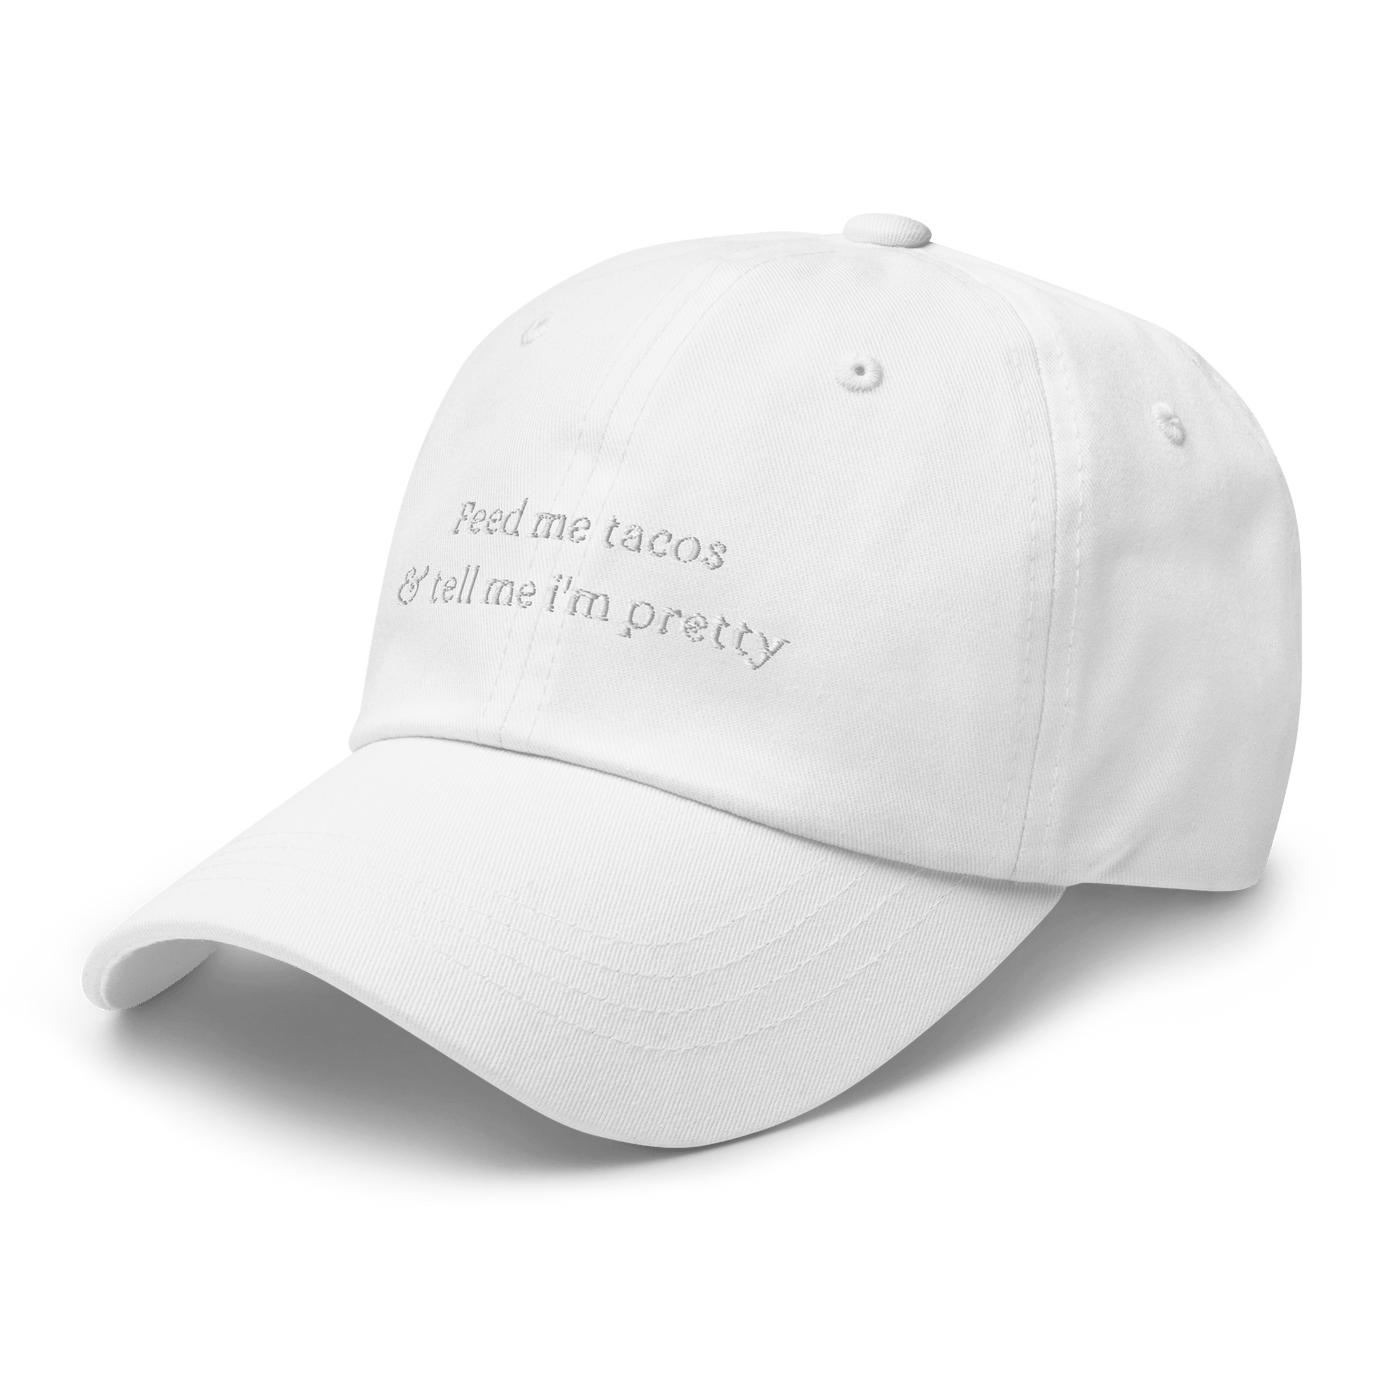 Feed me tacos Dad hat - White - - Just Another Cap Store